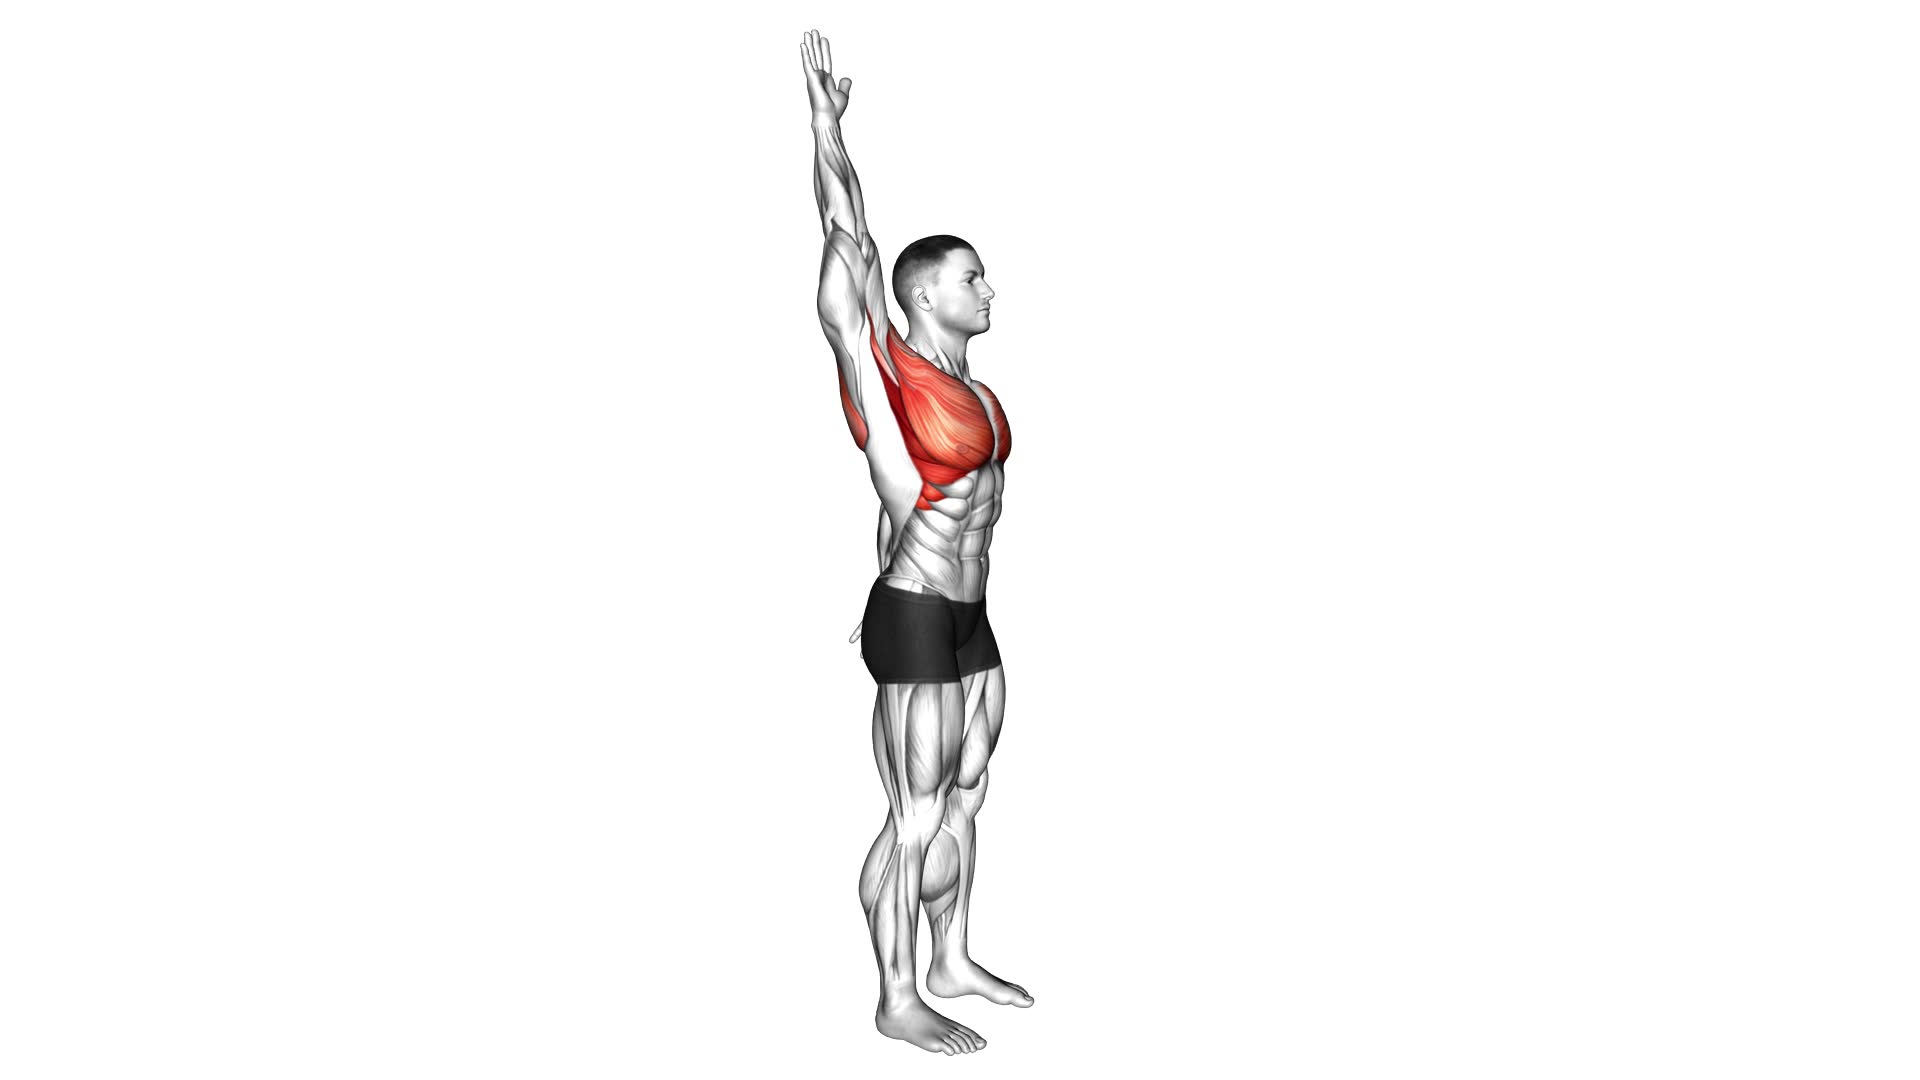 Standing Overhead Shoulder Stretch (VERSION 2) - Video Exercise Guide & Tips